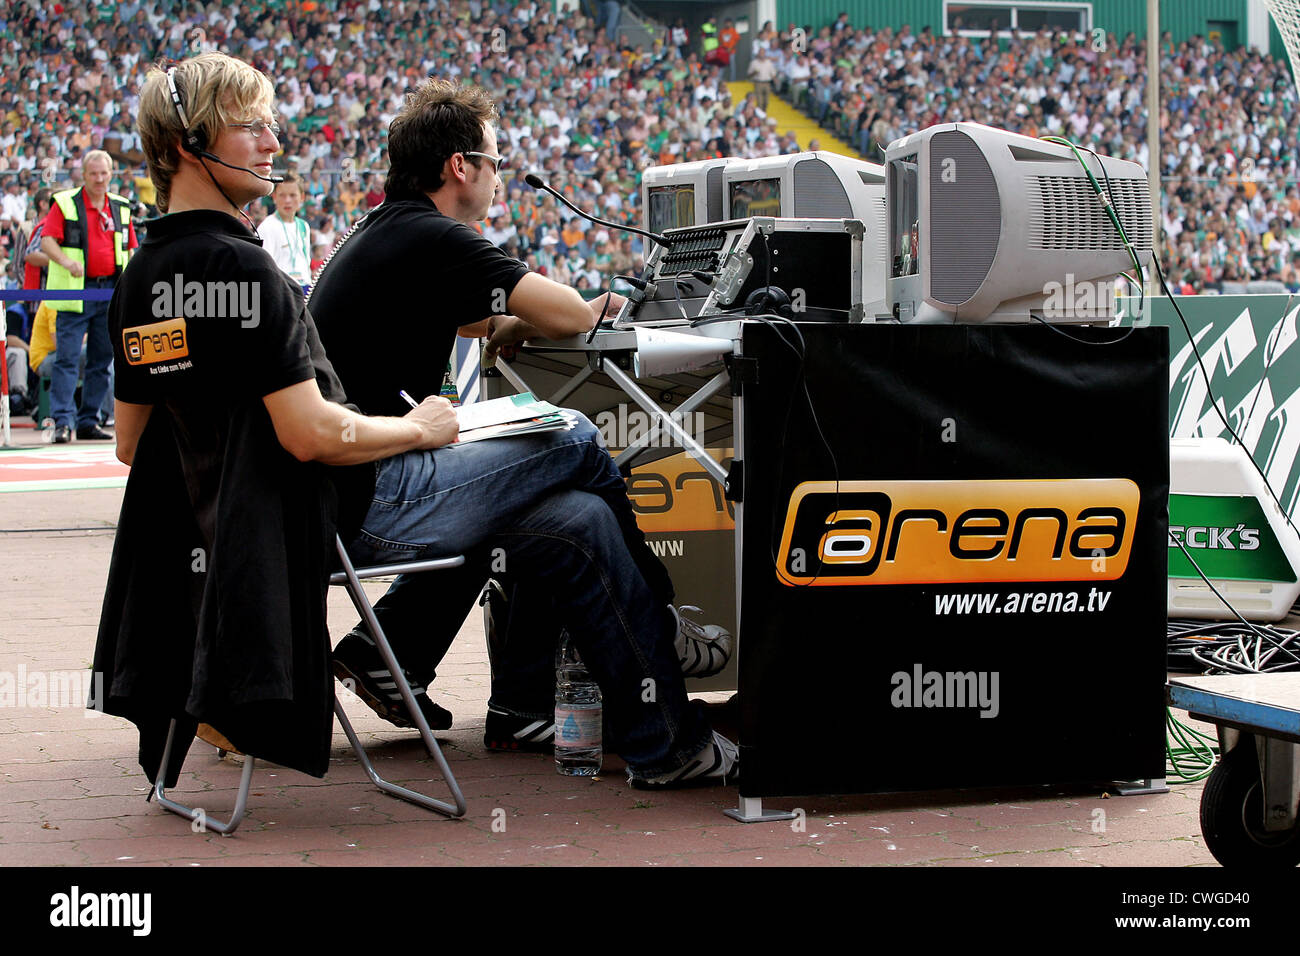 Reporter of the TV channel Arena during a Bundesliga match at the Stock  Photo - Alamy